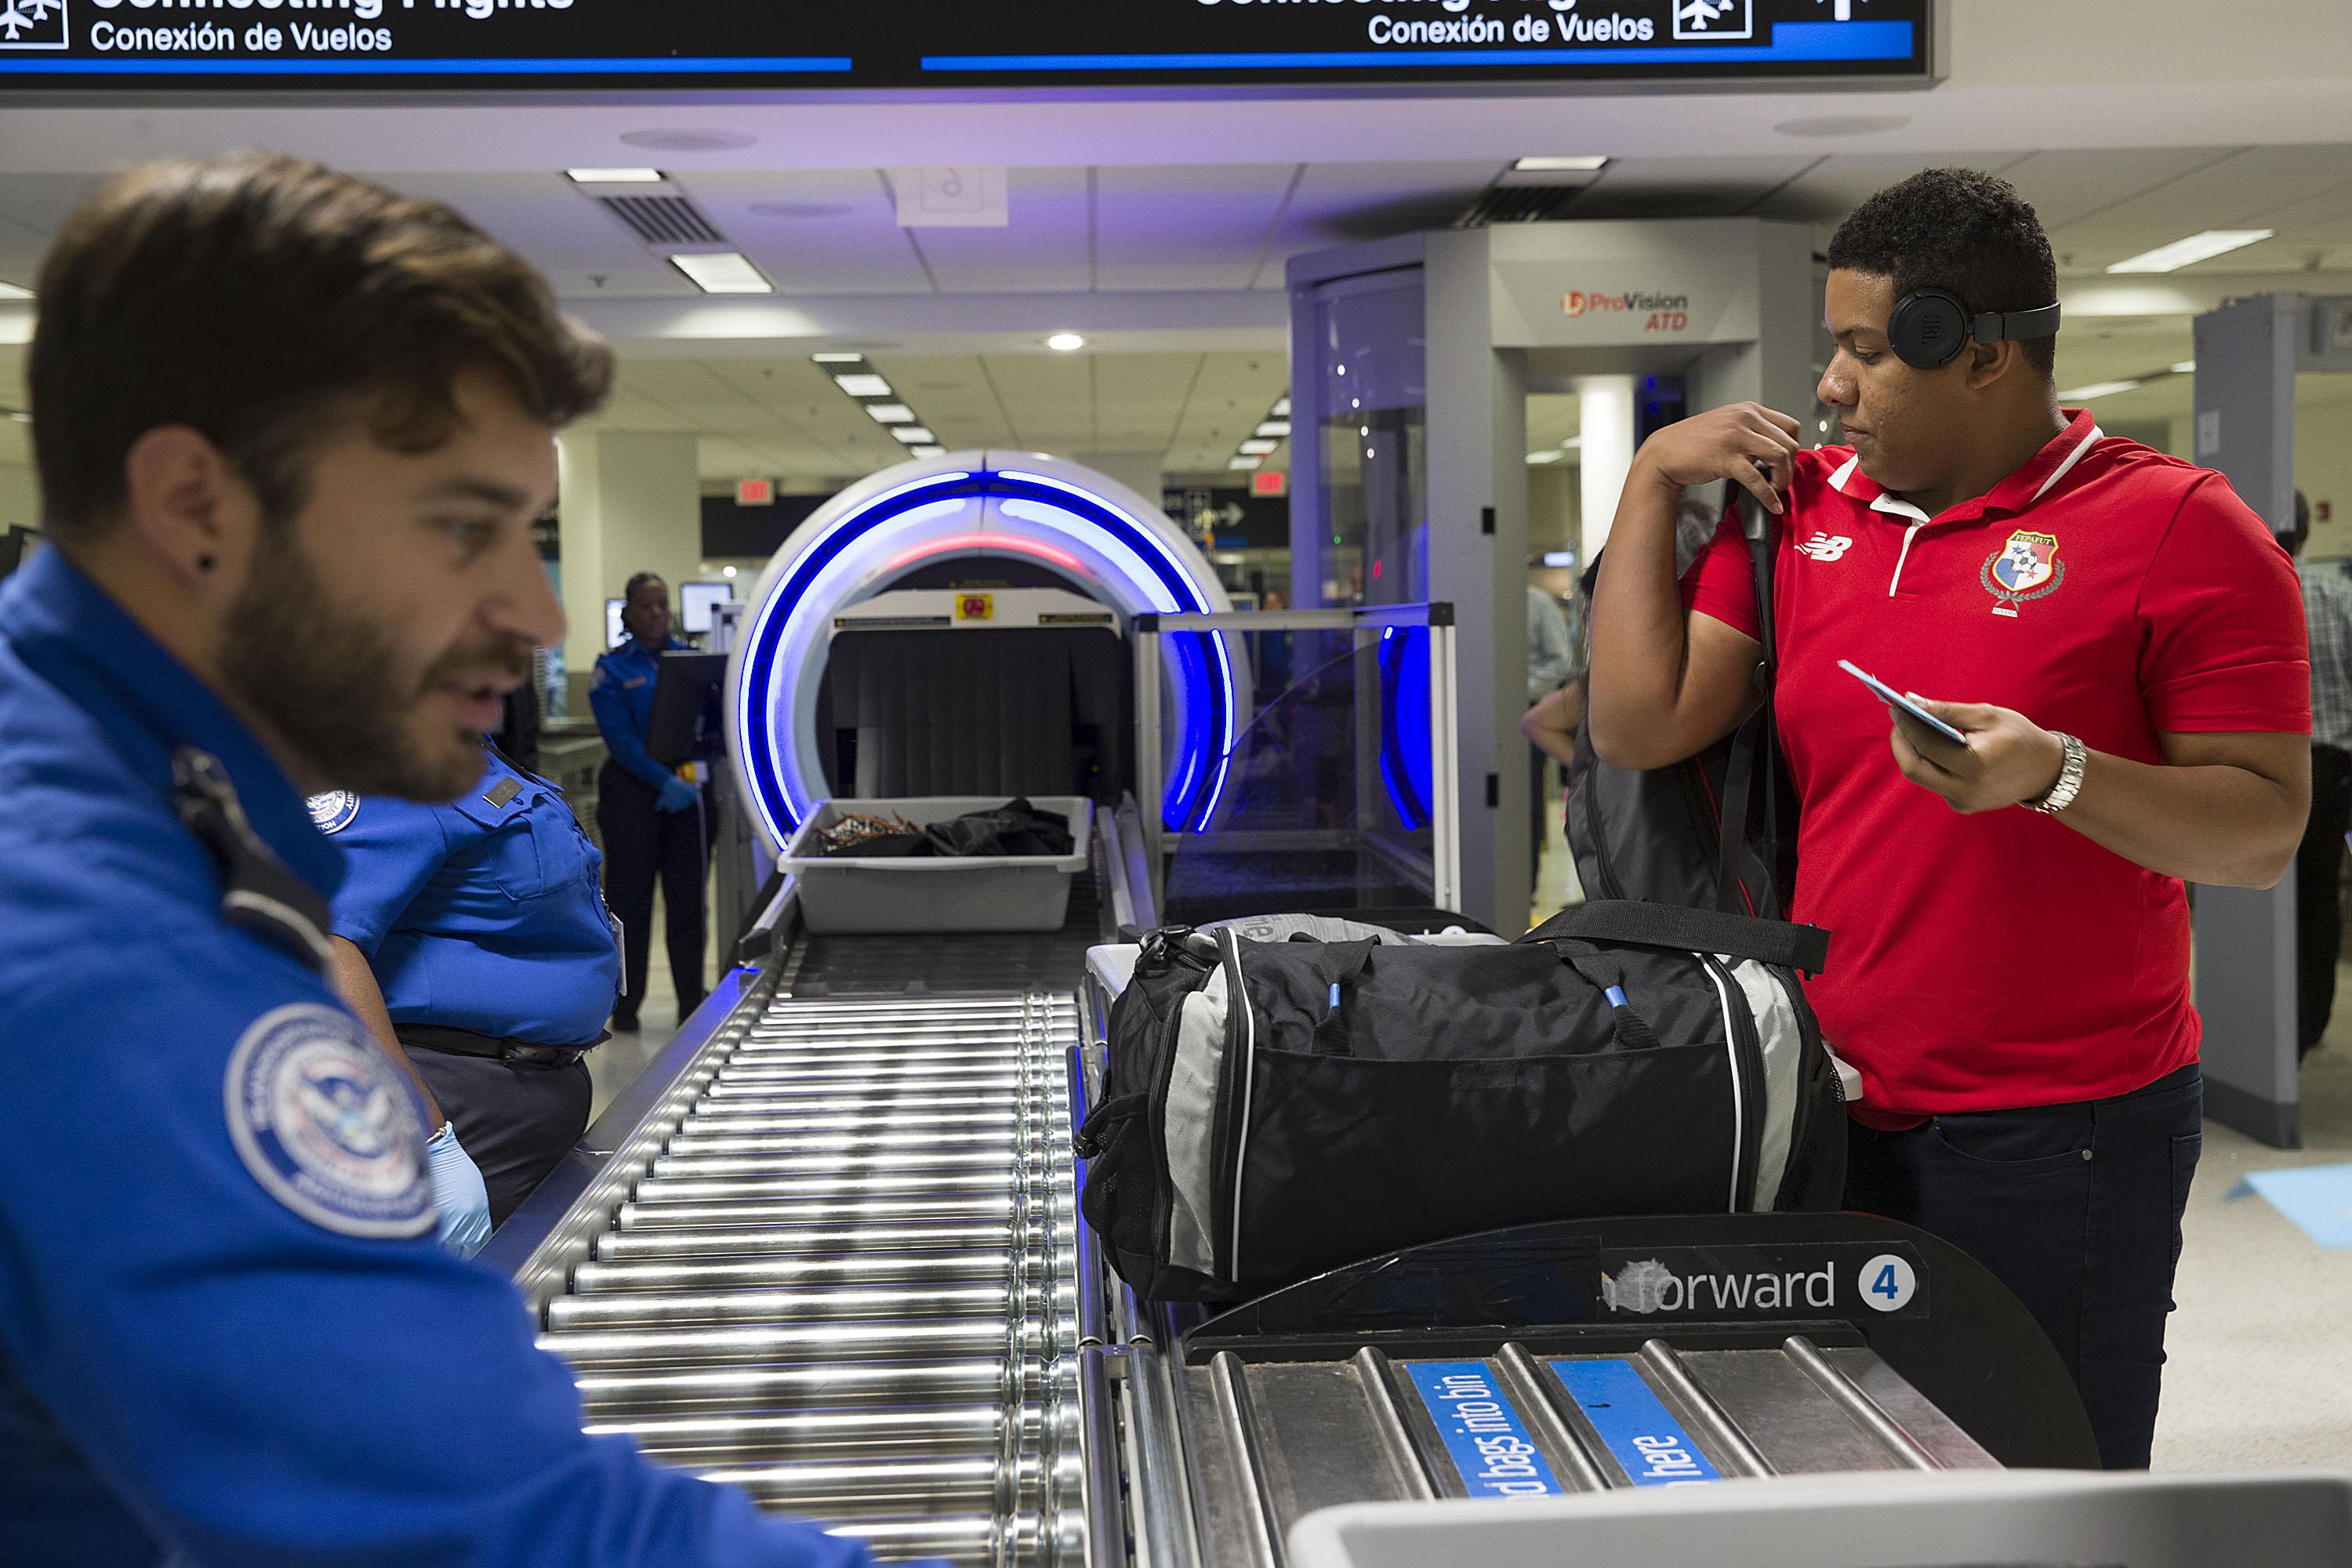 A 3D scanner in action at Miami international airport